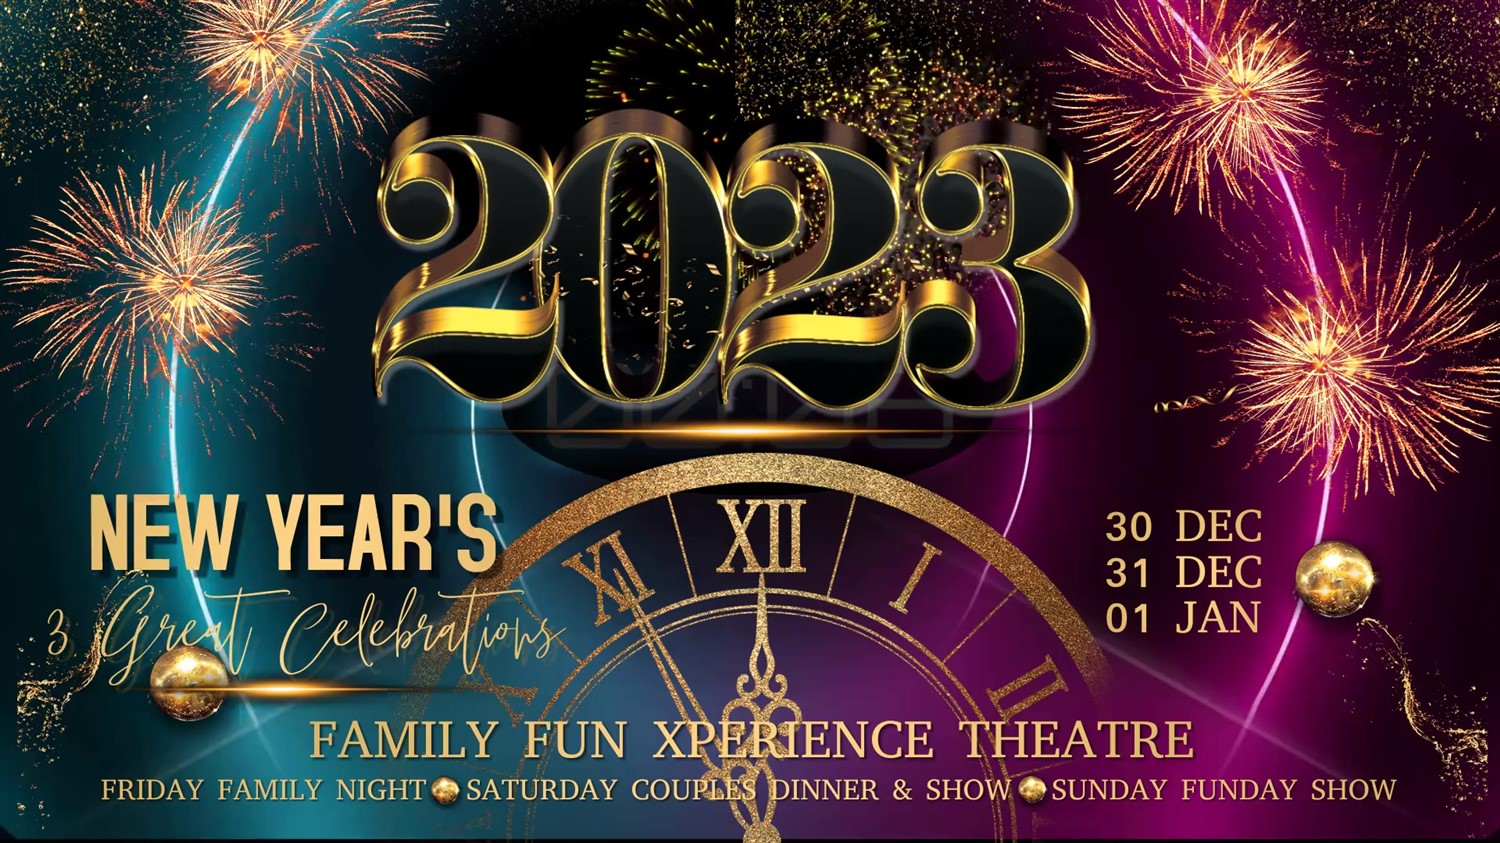 New Year's Eve Couple's Event Dinner, Game Show, Music, and Celebration! (Couple's Only, 18 & Over) on Dec 31, 19:30@FFX Theatre - Pick a seat, Buy tickets and Get information on Family Fun Xperience tickets.ffxshow.org